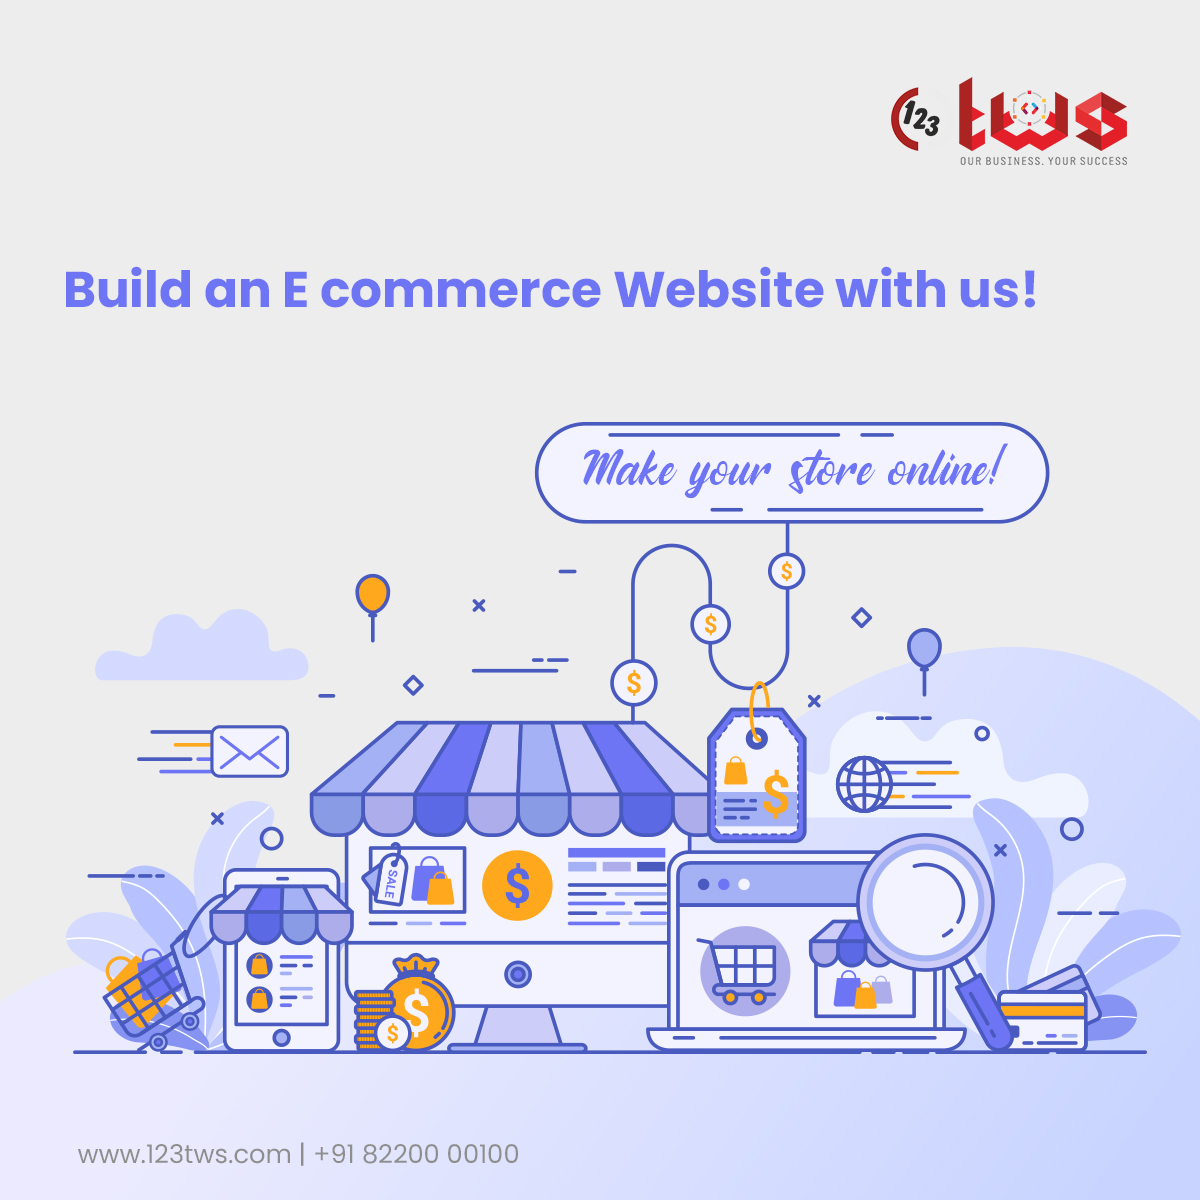 Are you looking for an e-commerce website? 123 total web solutions can build one for you.

Visit: webdesign.123coimbatore.com/e-commerce-in-…

#ecommercewebsitedevelopmentcompany #ecommercewebsitedesigning #ecommercewebsitedesigner #ecommercewebsitedevelopmentservices